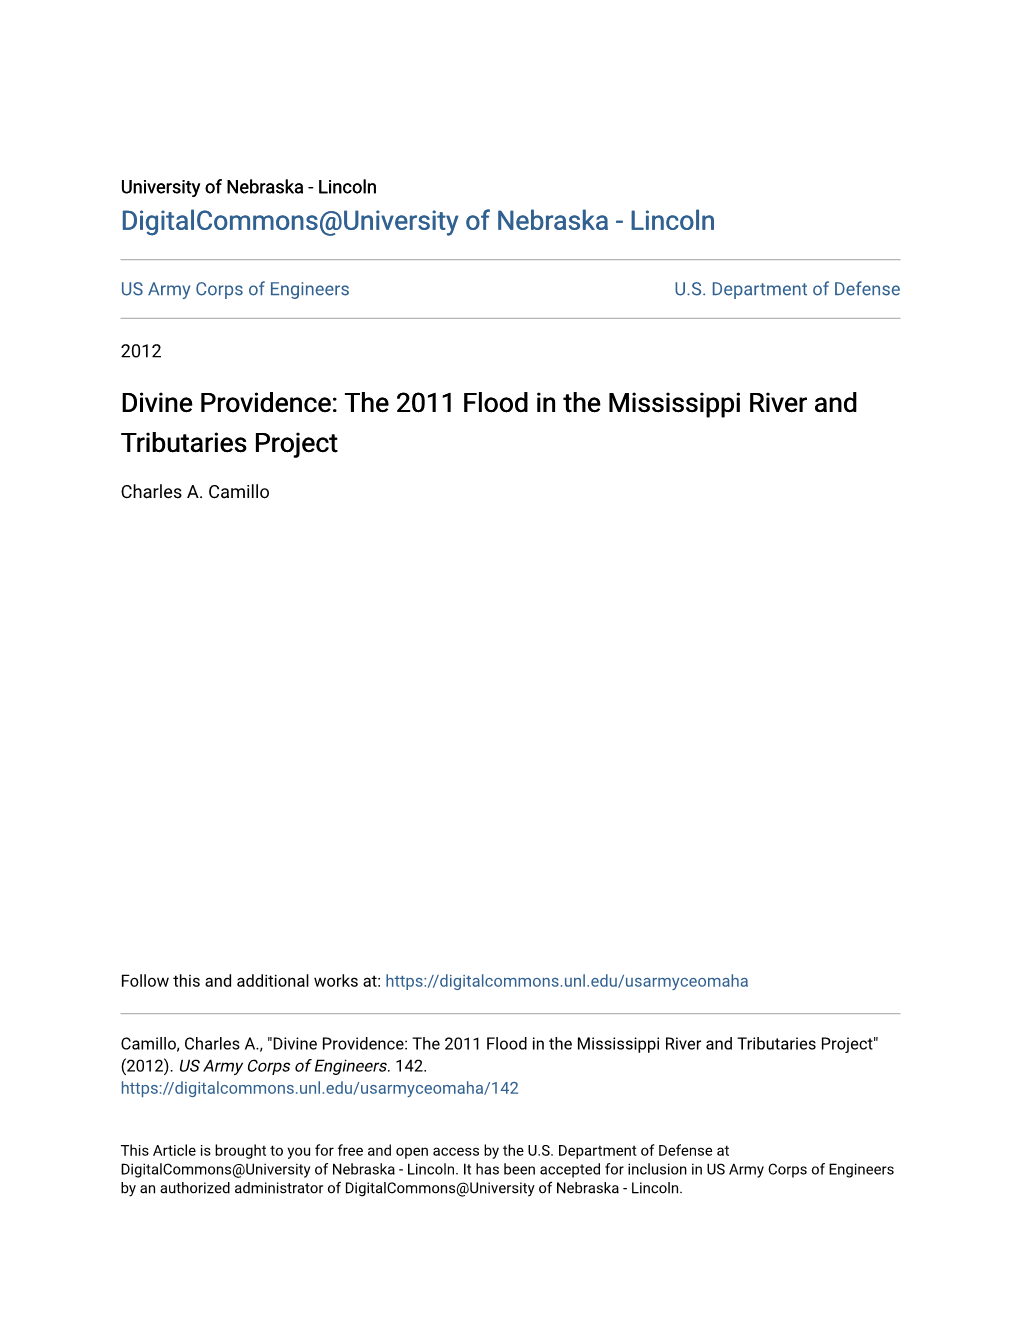 Divine Providence: the 2011 Flood in the Mississippi River and Tributaries Project